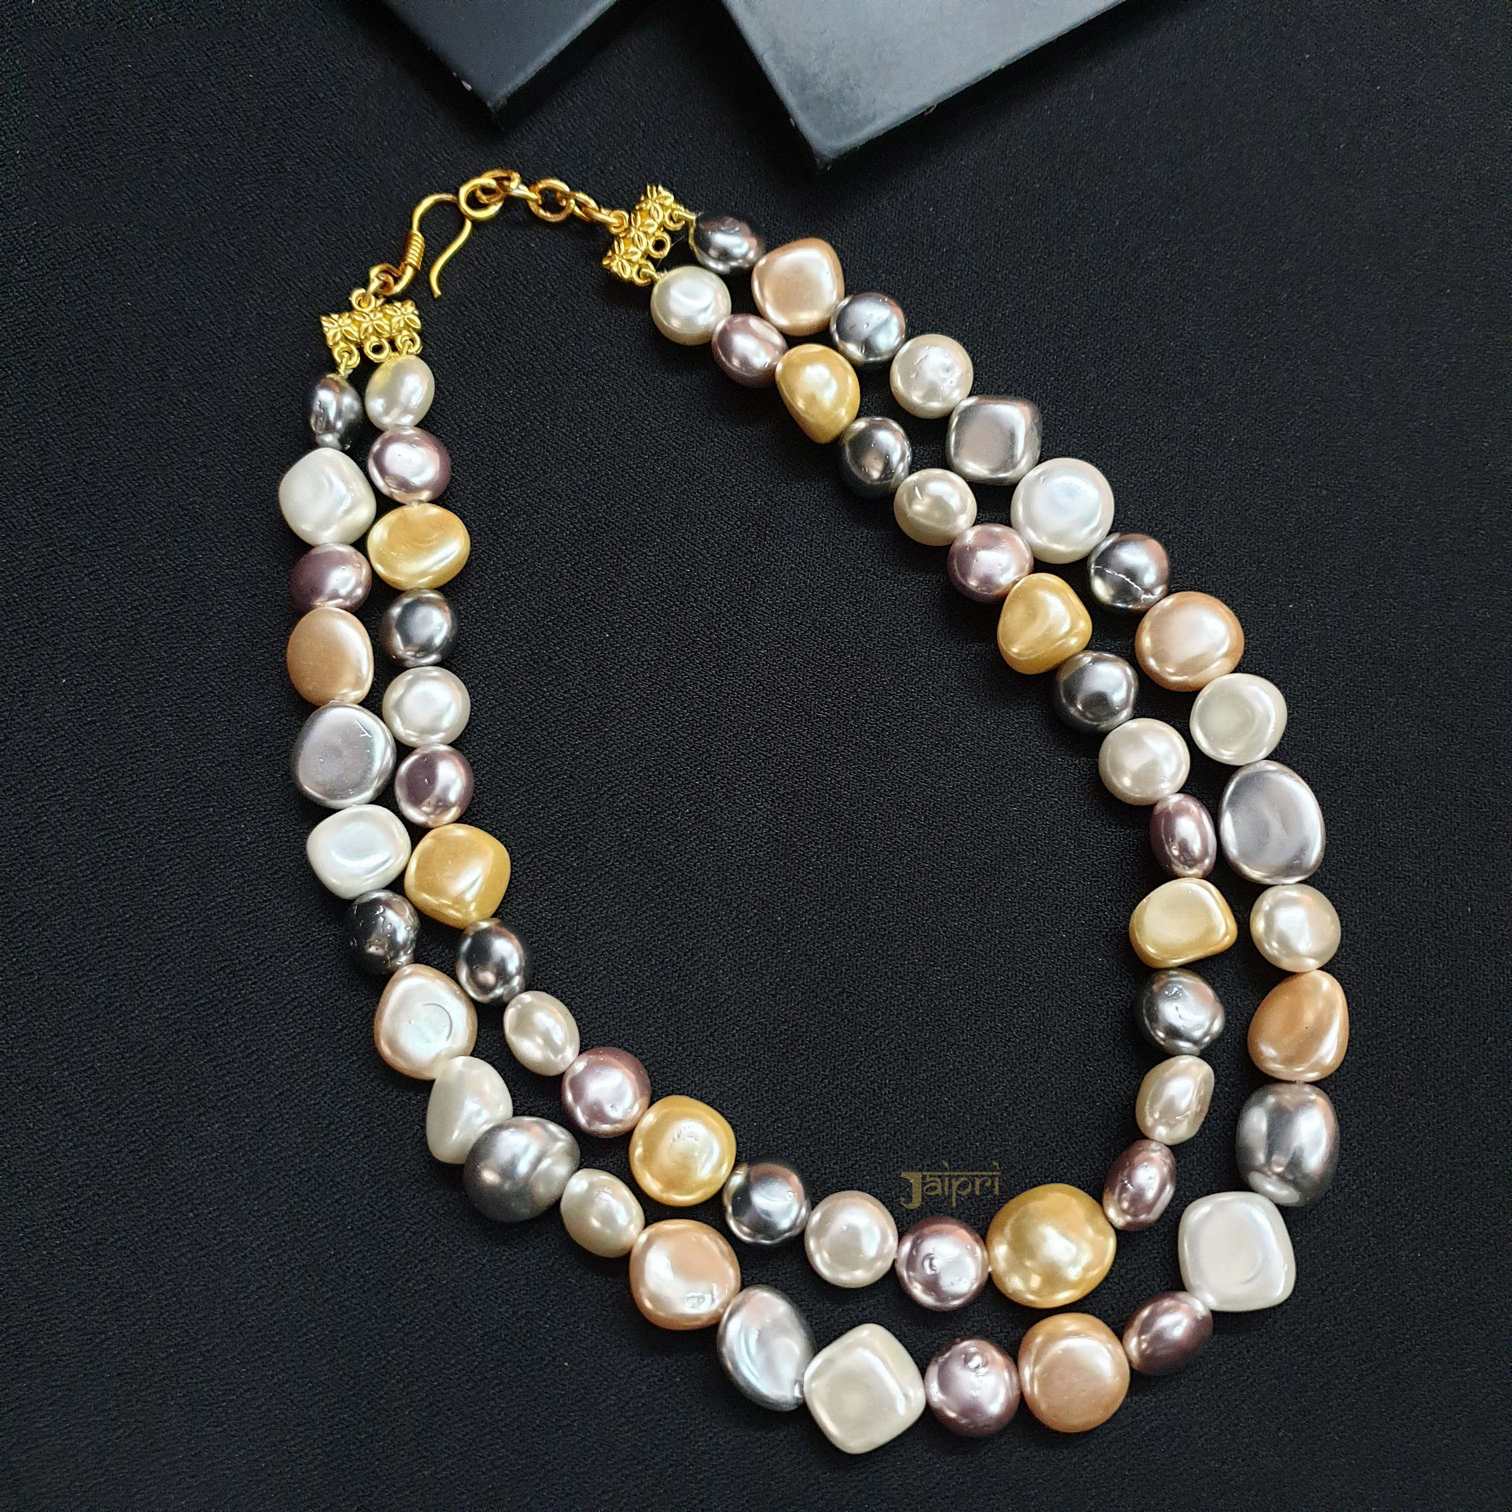 Pearls & Natural Uneven Stone Necklace